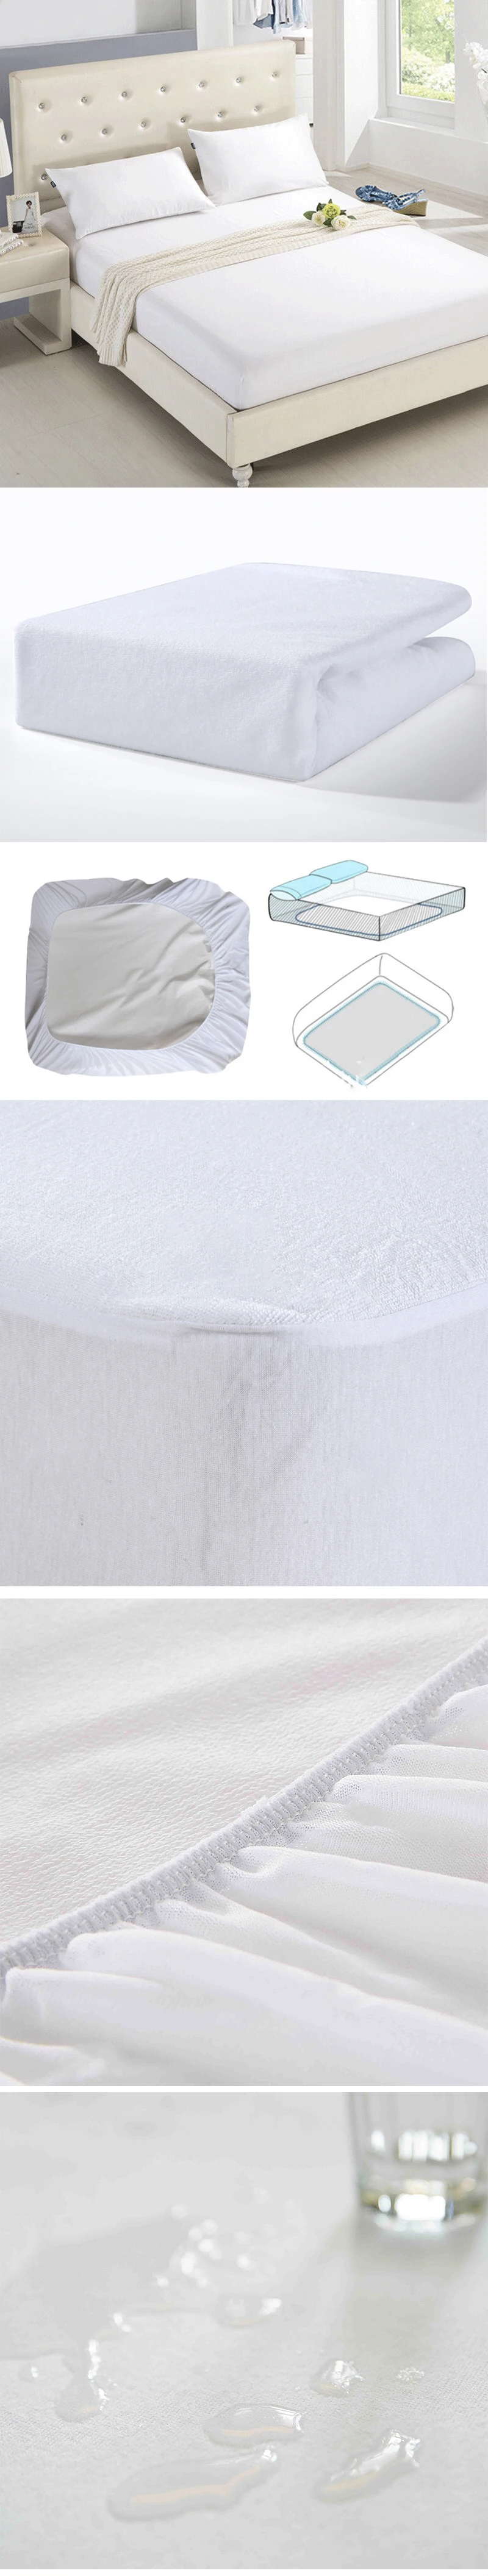 Queen Mattress Protector Waterproof Bed Cover Soft Surface Fabric Breathable Quiet Hypoallergenic Mattress cover